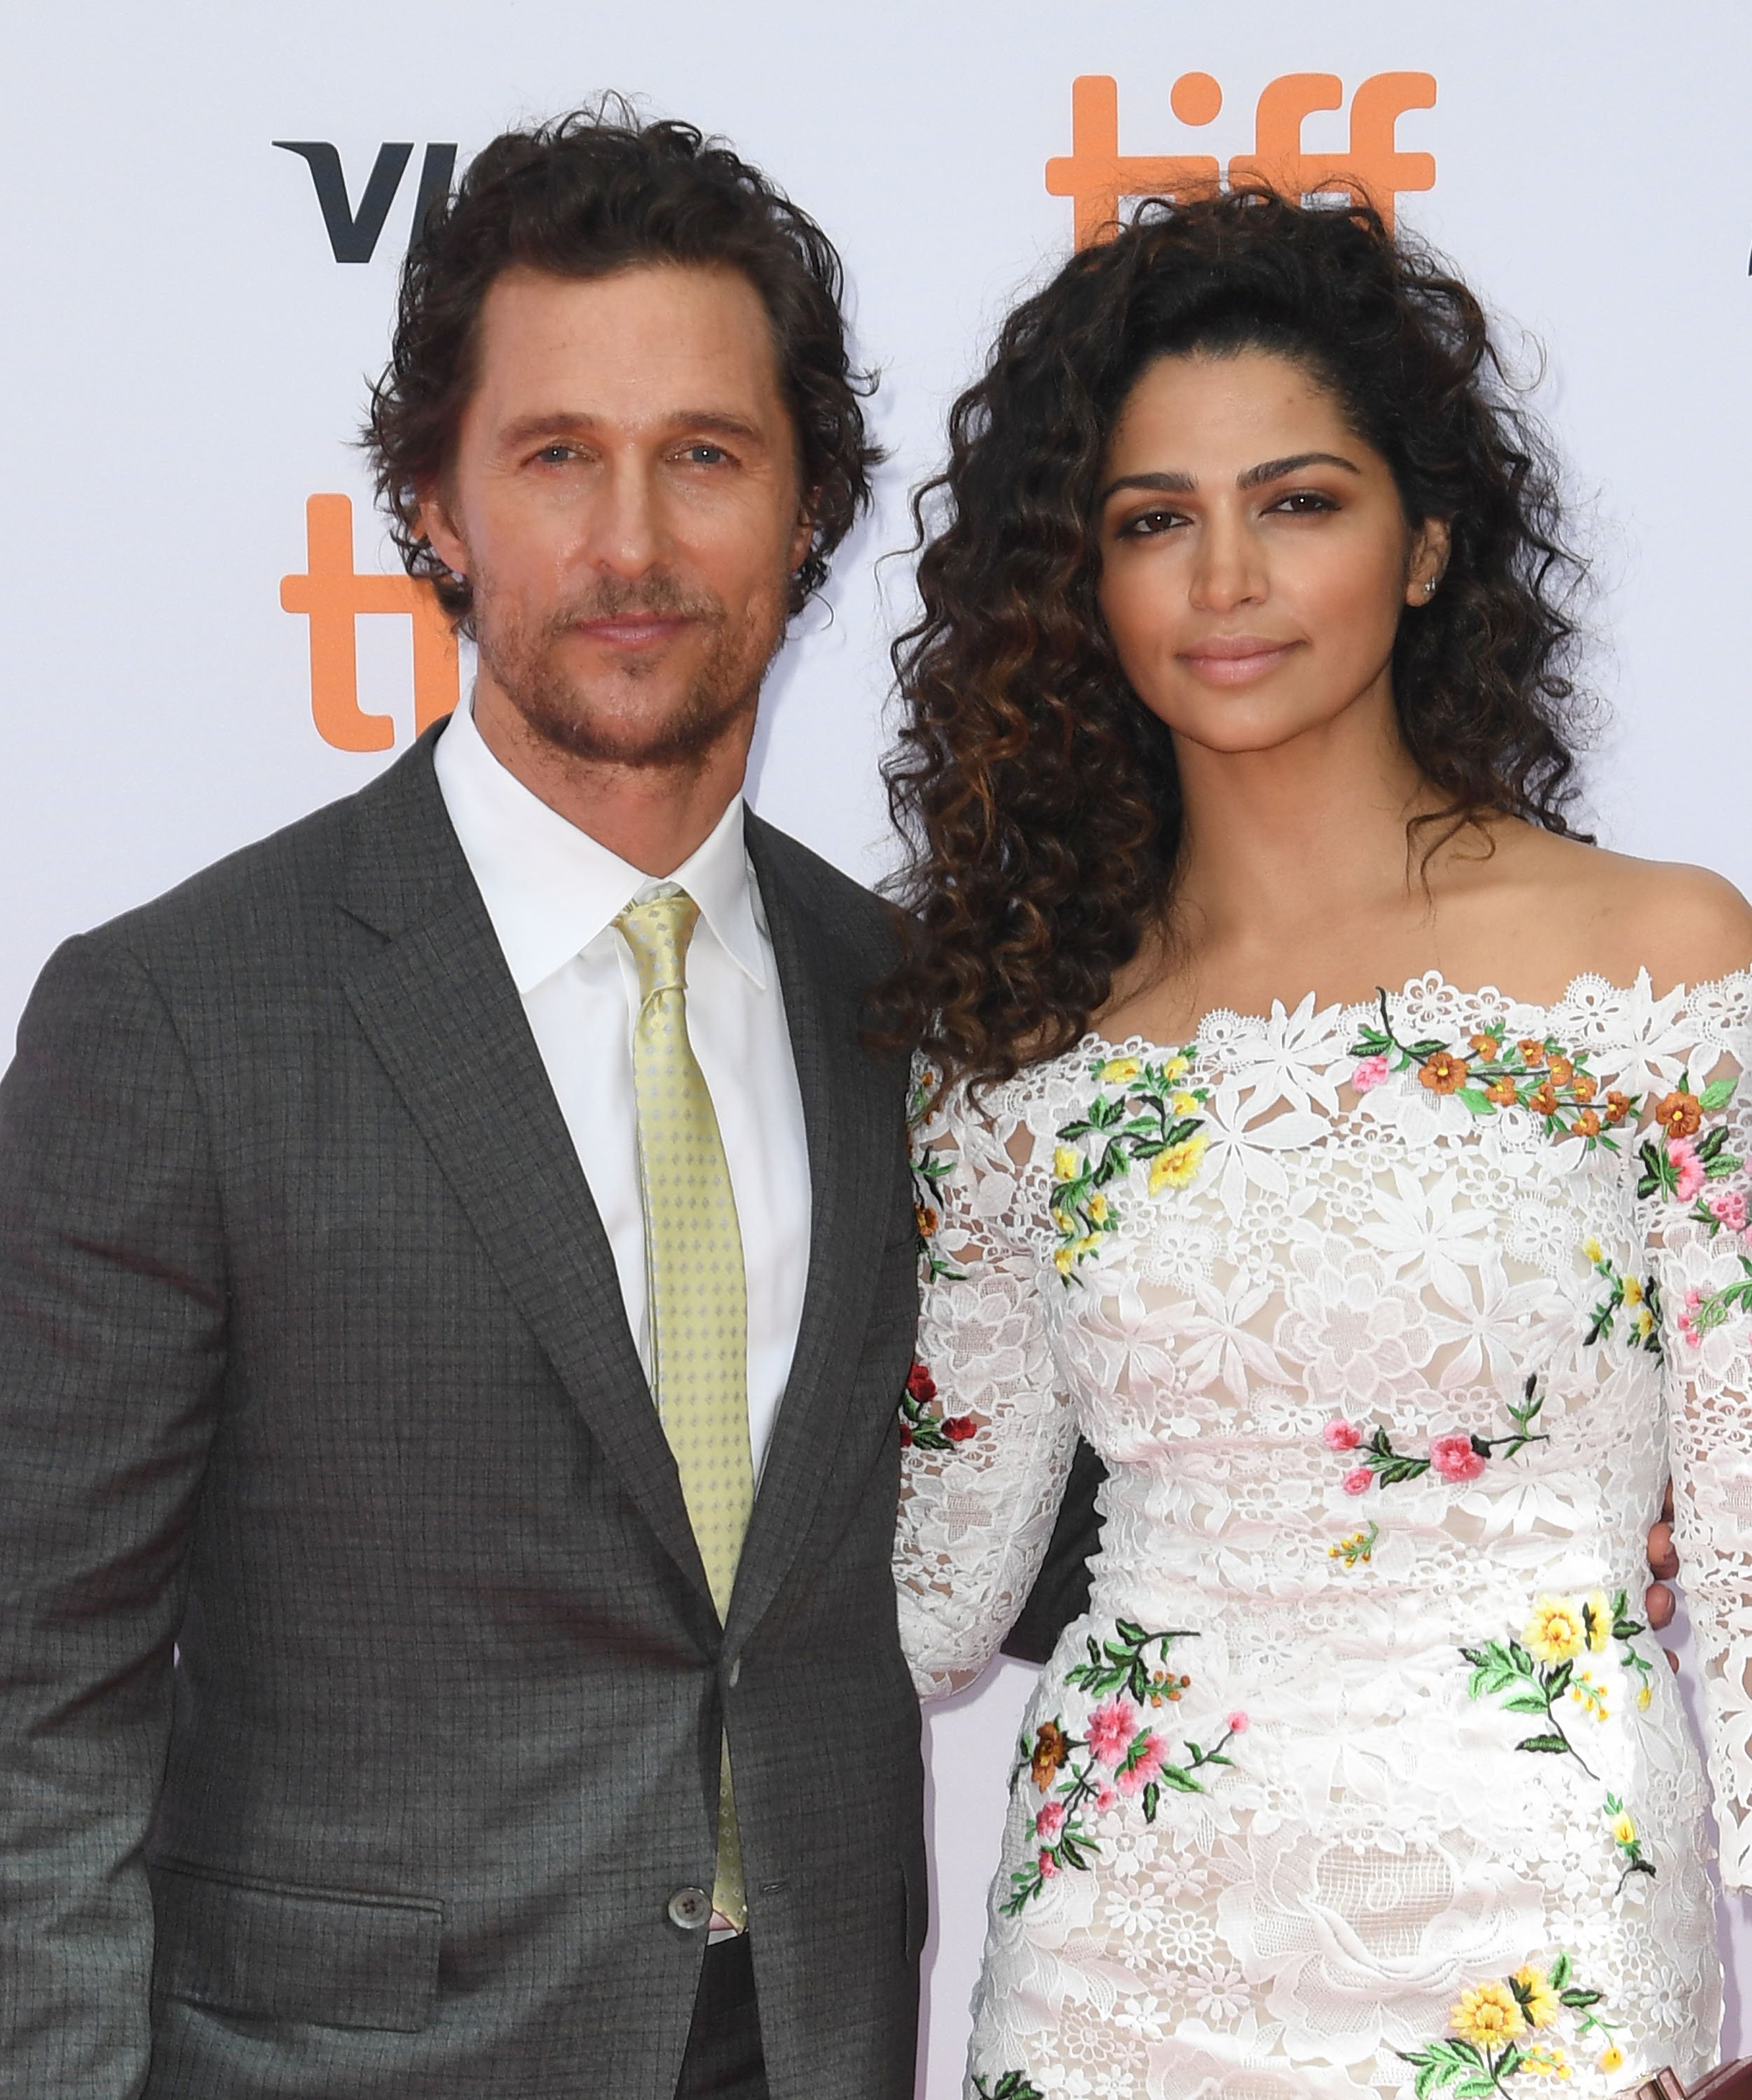  Matthew McConaughey and wife Camila Alves attend the premiere of 'Sing' during the 2016 Toronto International Film Festival at Princess of Wales Theatre on September 11, 2016 | Photo: Getty Images